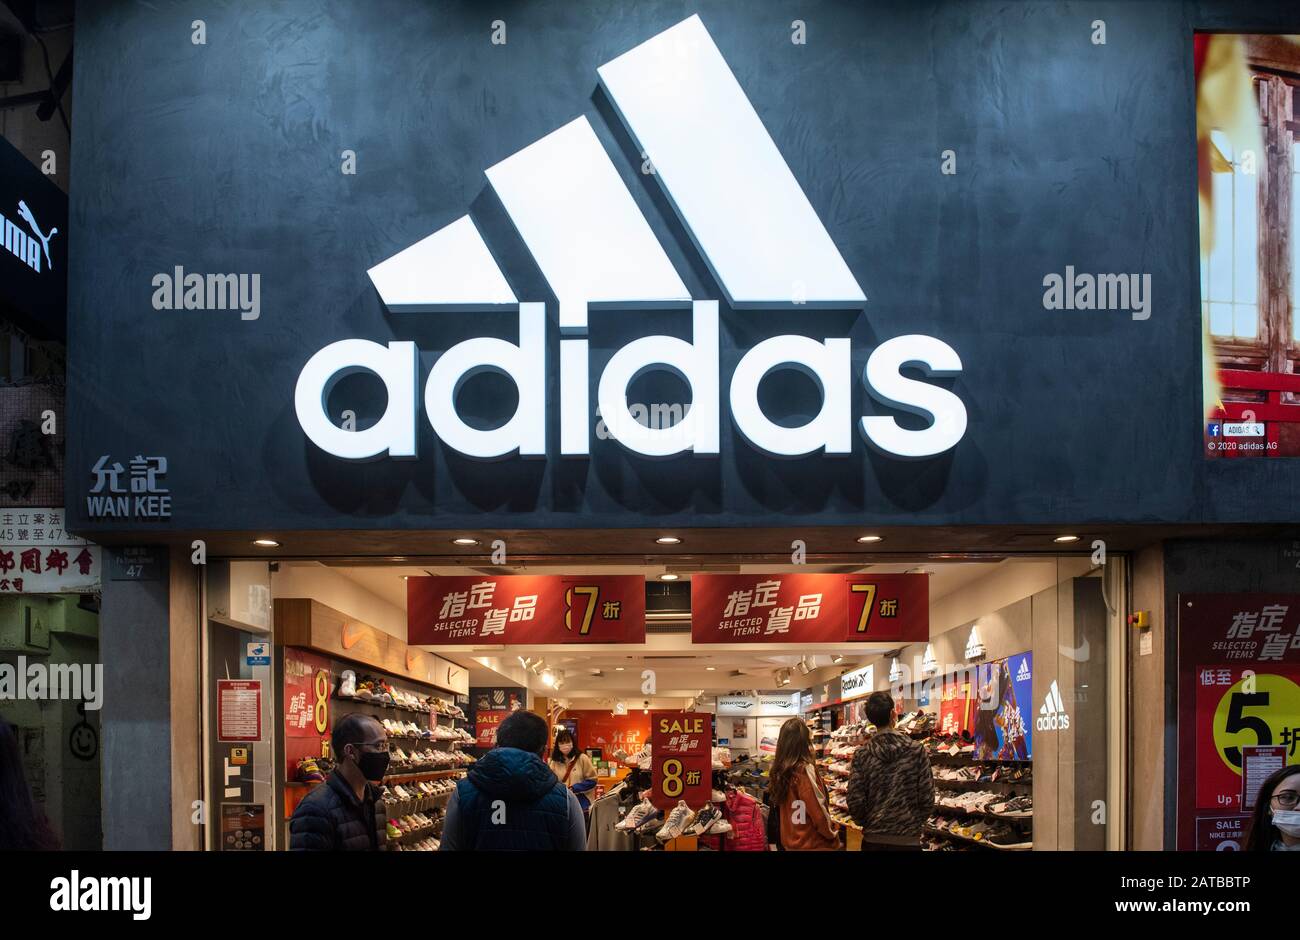 Stores That Sell Adidas Clothing Outlet, 57% OFF | www.ingeniovirtual.com